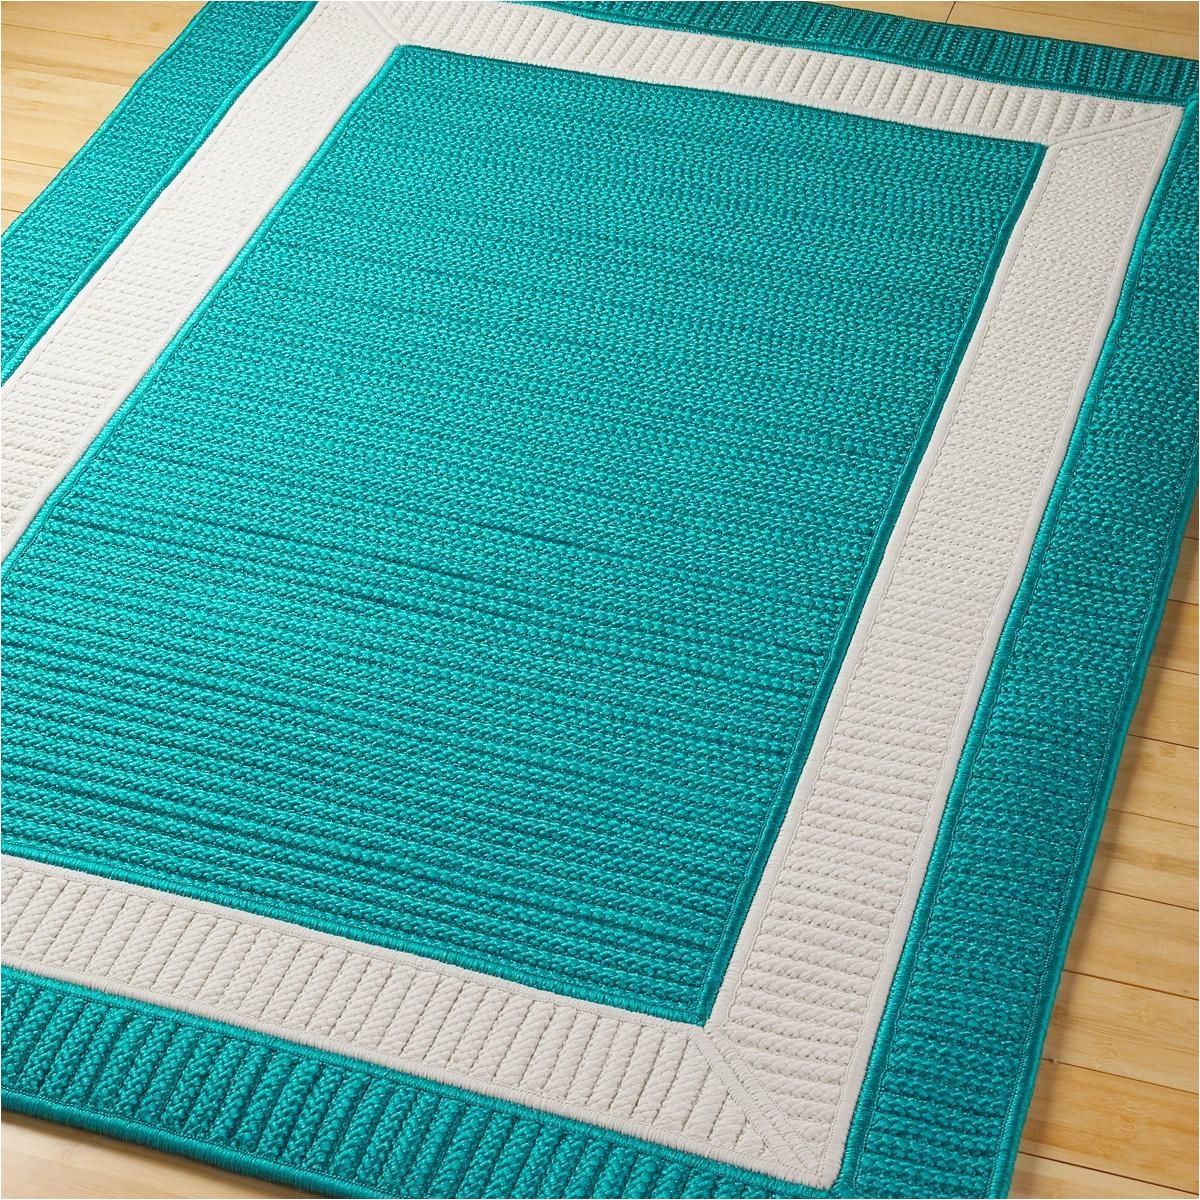 border braided indoor outdoor rug in turquoise